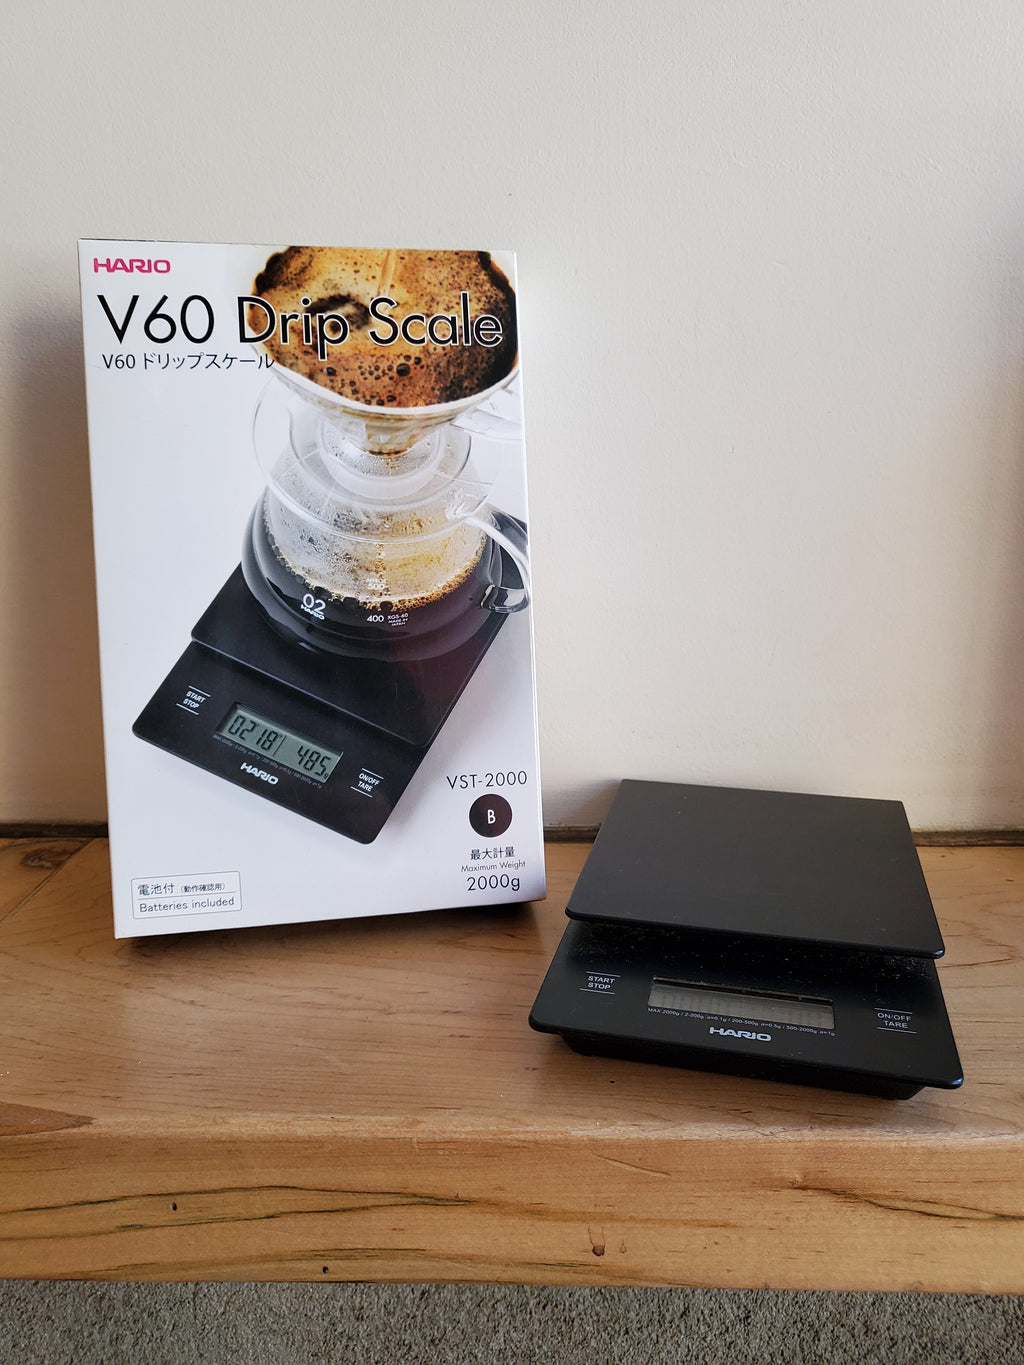 * Brewing Equipment - Hario V60 Coffee Electronic Drip Scale & Timer